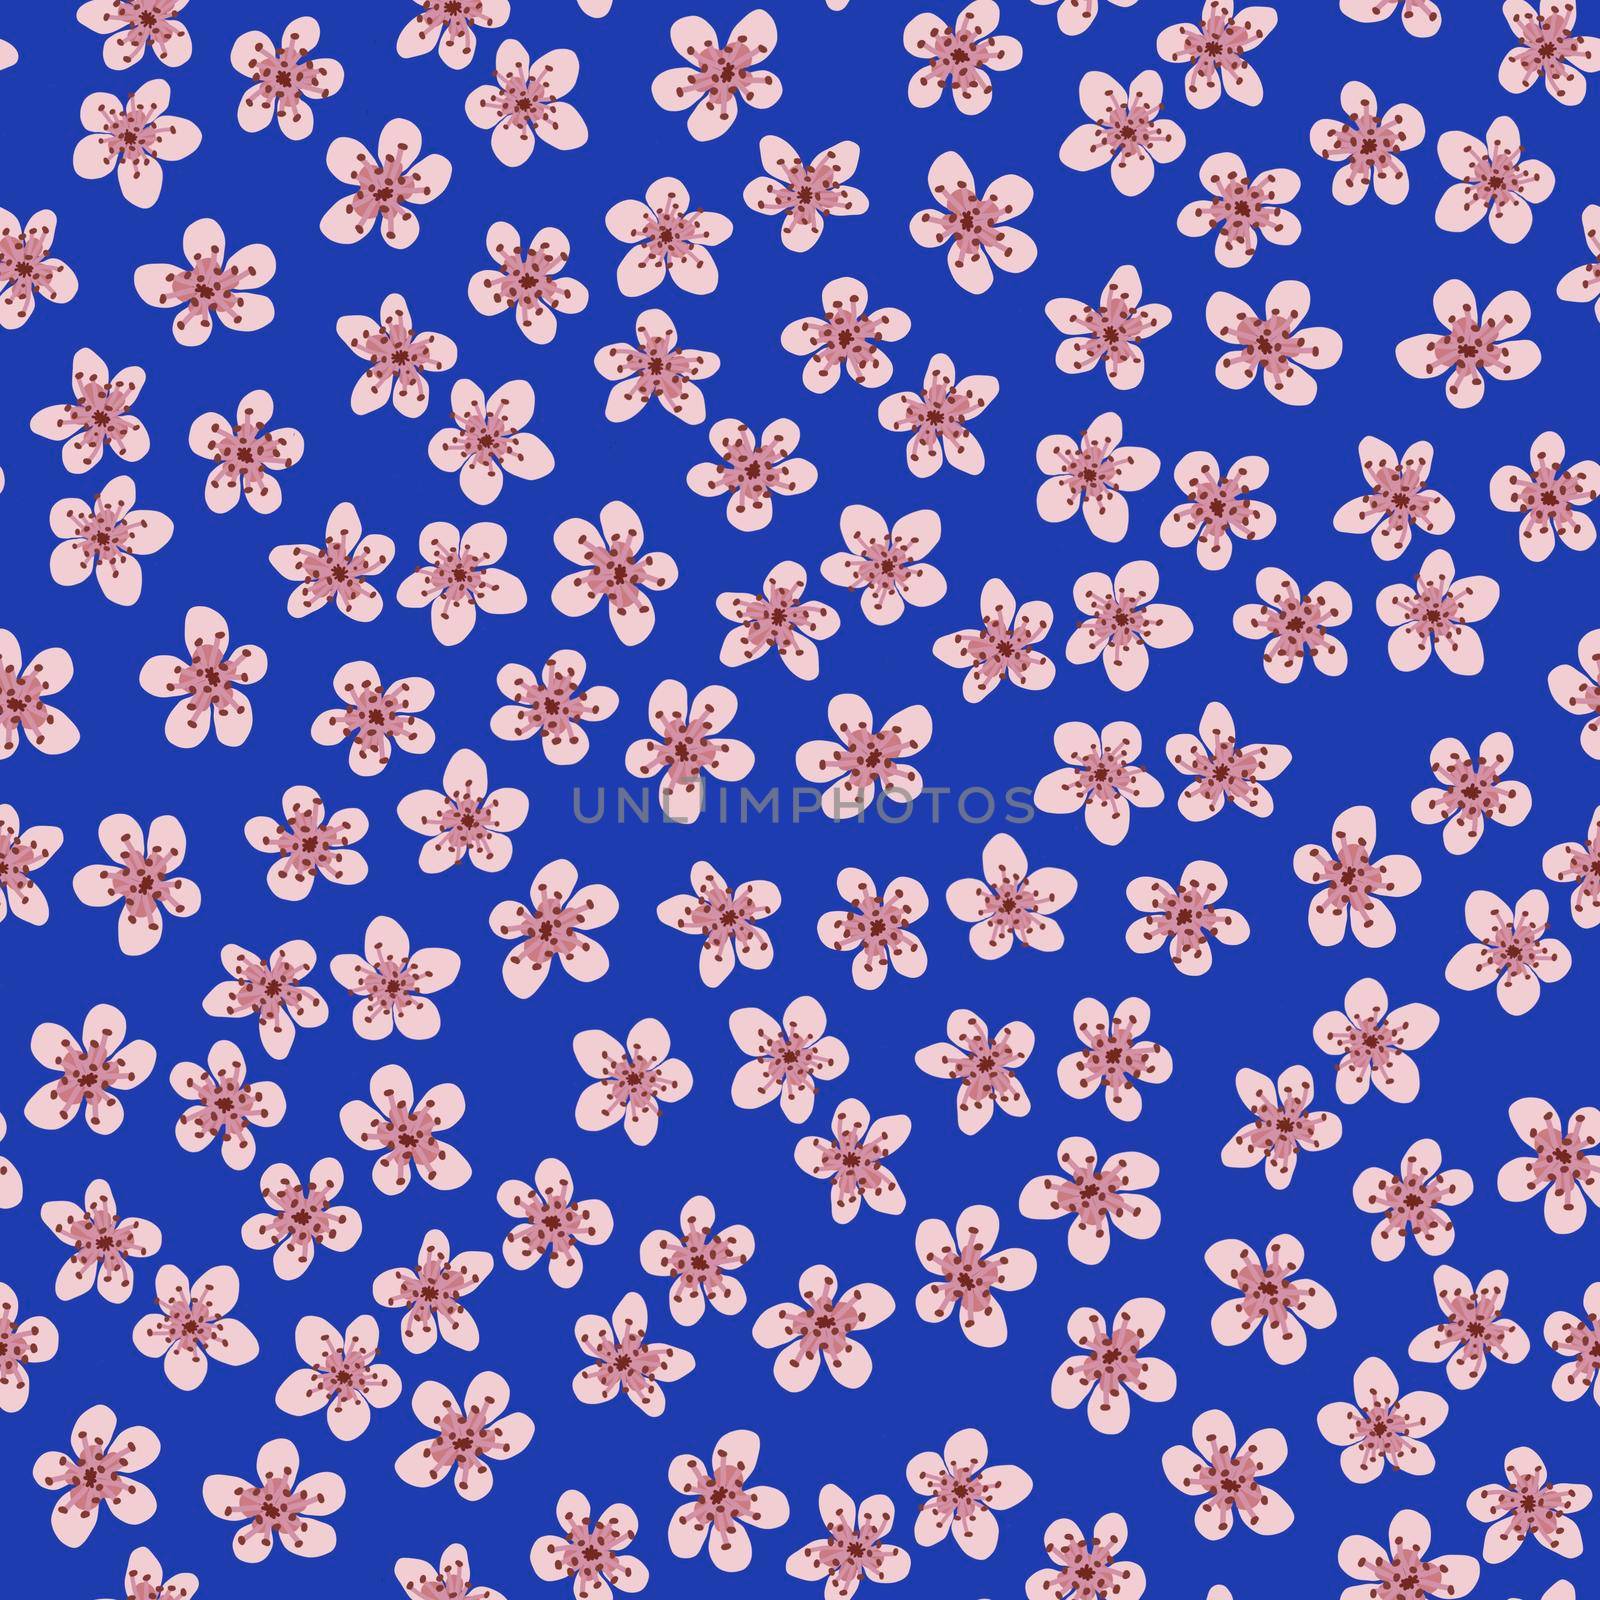 Seamless pattern with blossoming Japanese cherry sakura for fabric, packaging, wallpaper, textile decor, design, invitations, print, gift wrap, manufacturing. Pink flowers on blue background